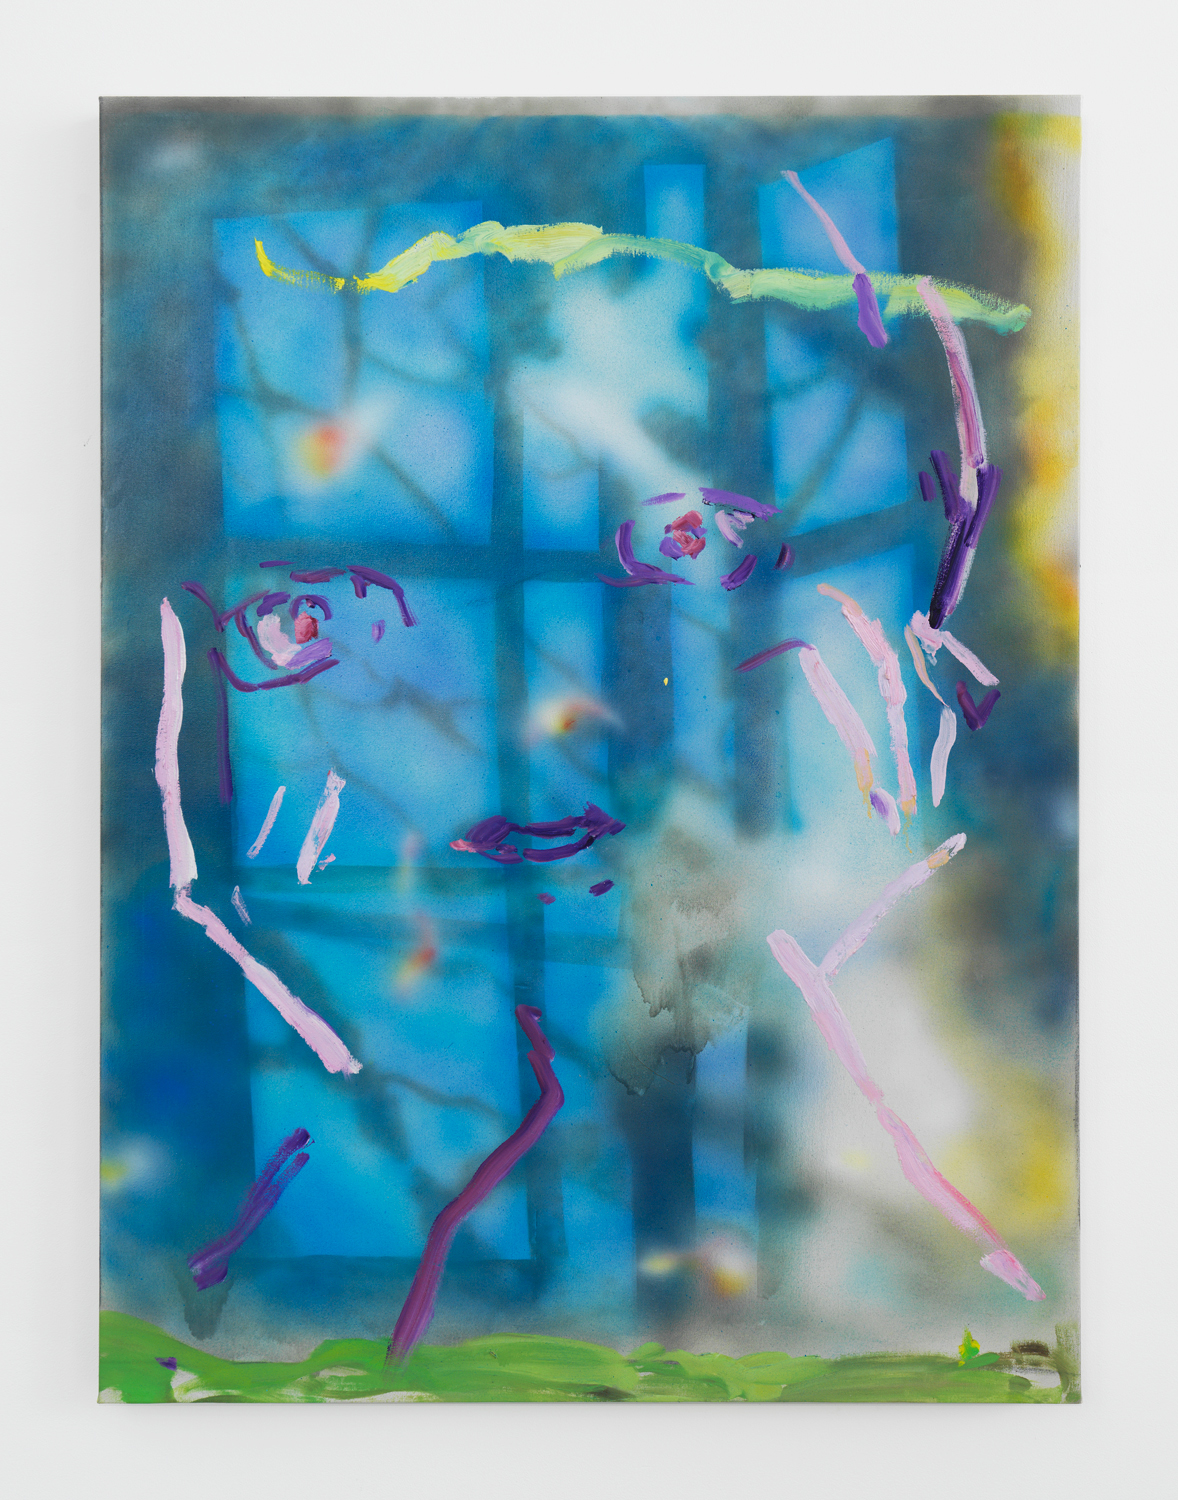 Rachel Rossin, The Window Again, 2021, Oil and airbrushed acrylic on canvas, 40h x 30w in.